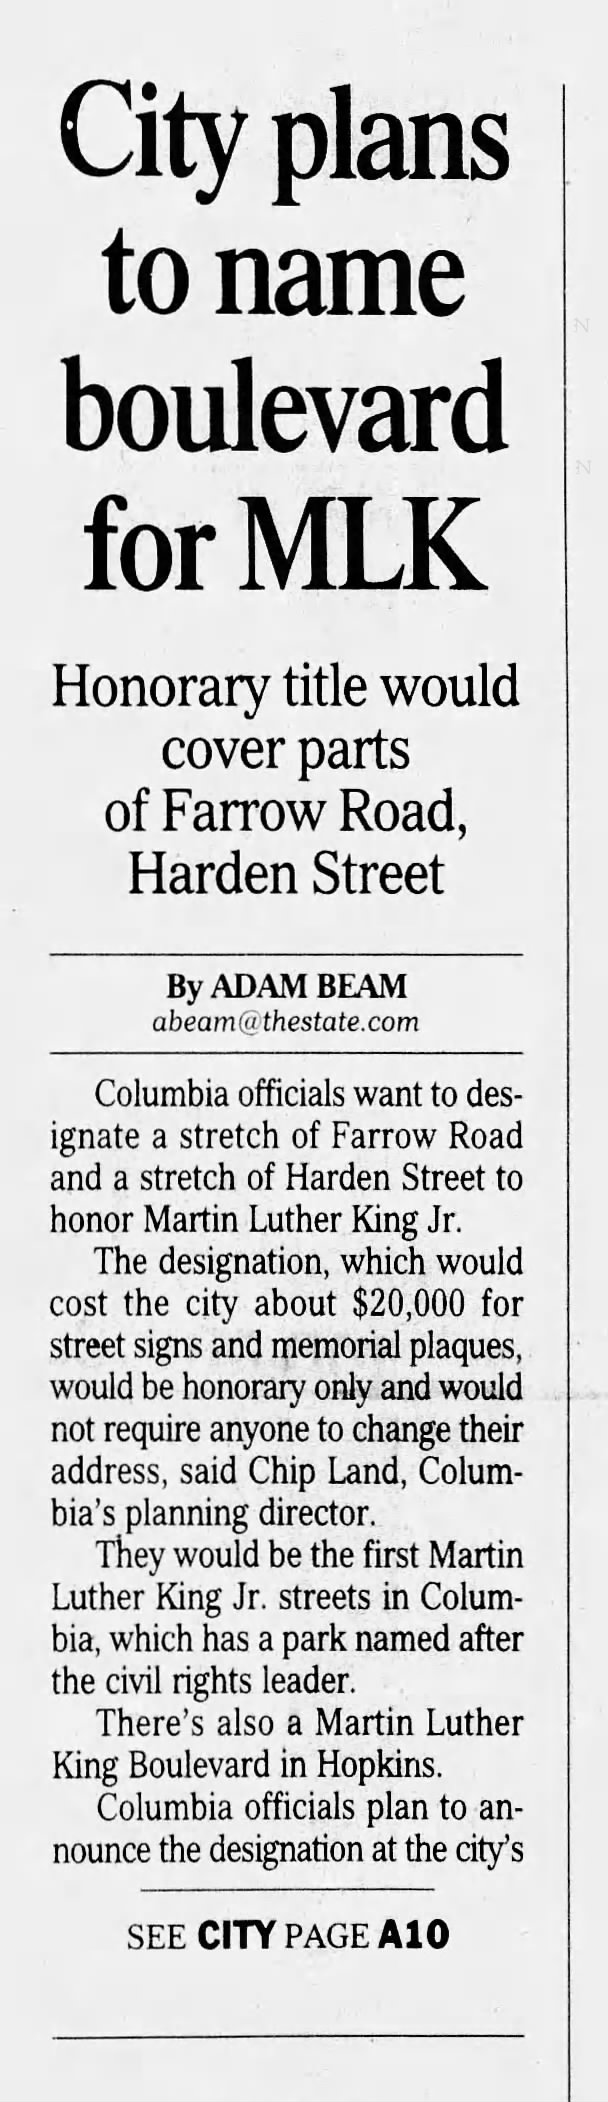 City plans to name boulevard for MLK